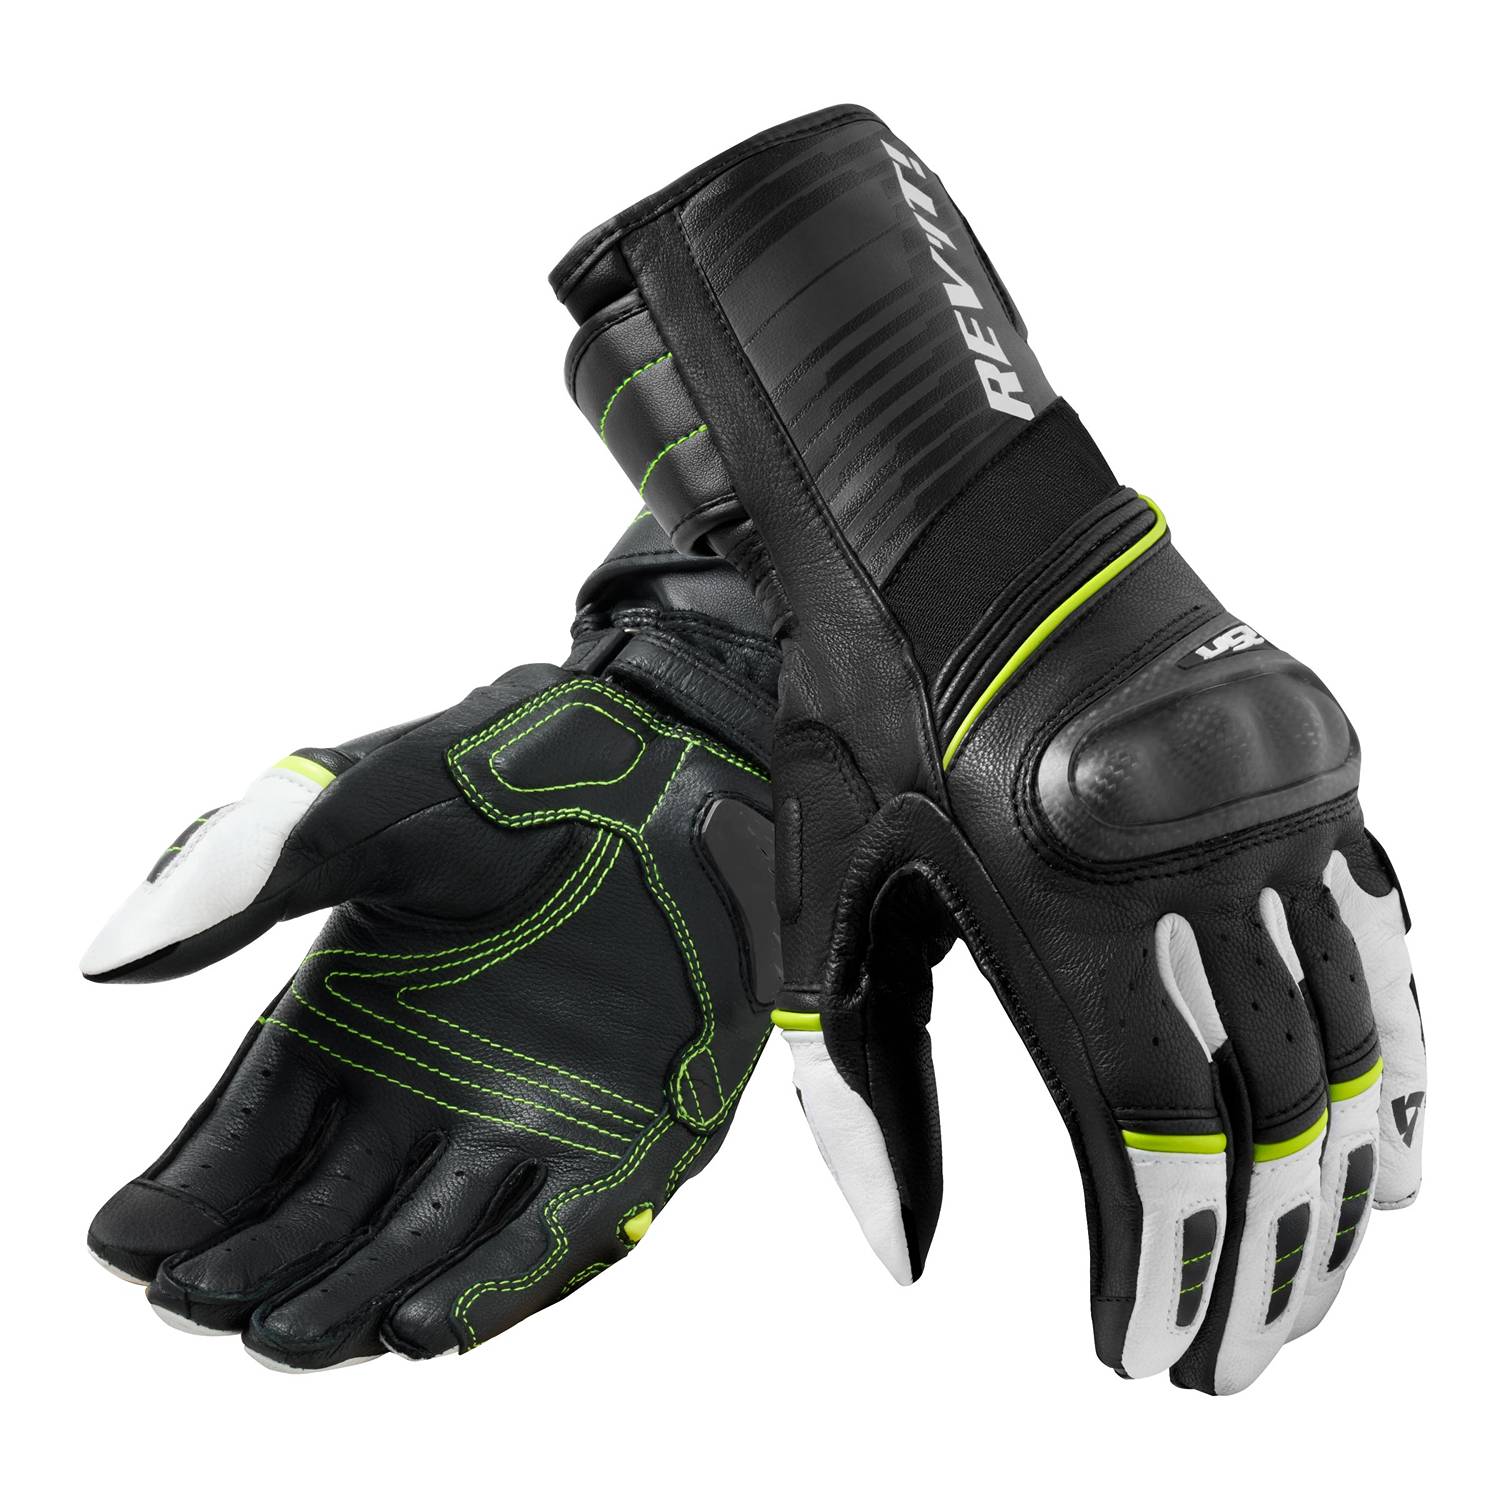 Image of REV'IT! RSR 4 Black Gloves Neon Yellow Size S ID 8700001306799